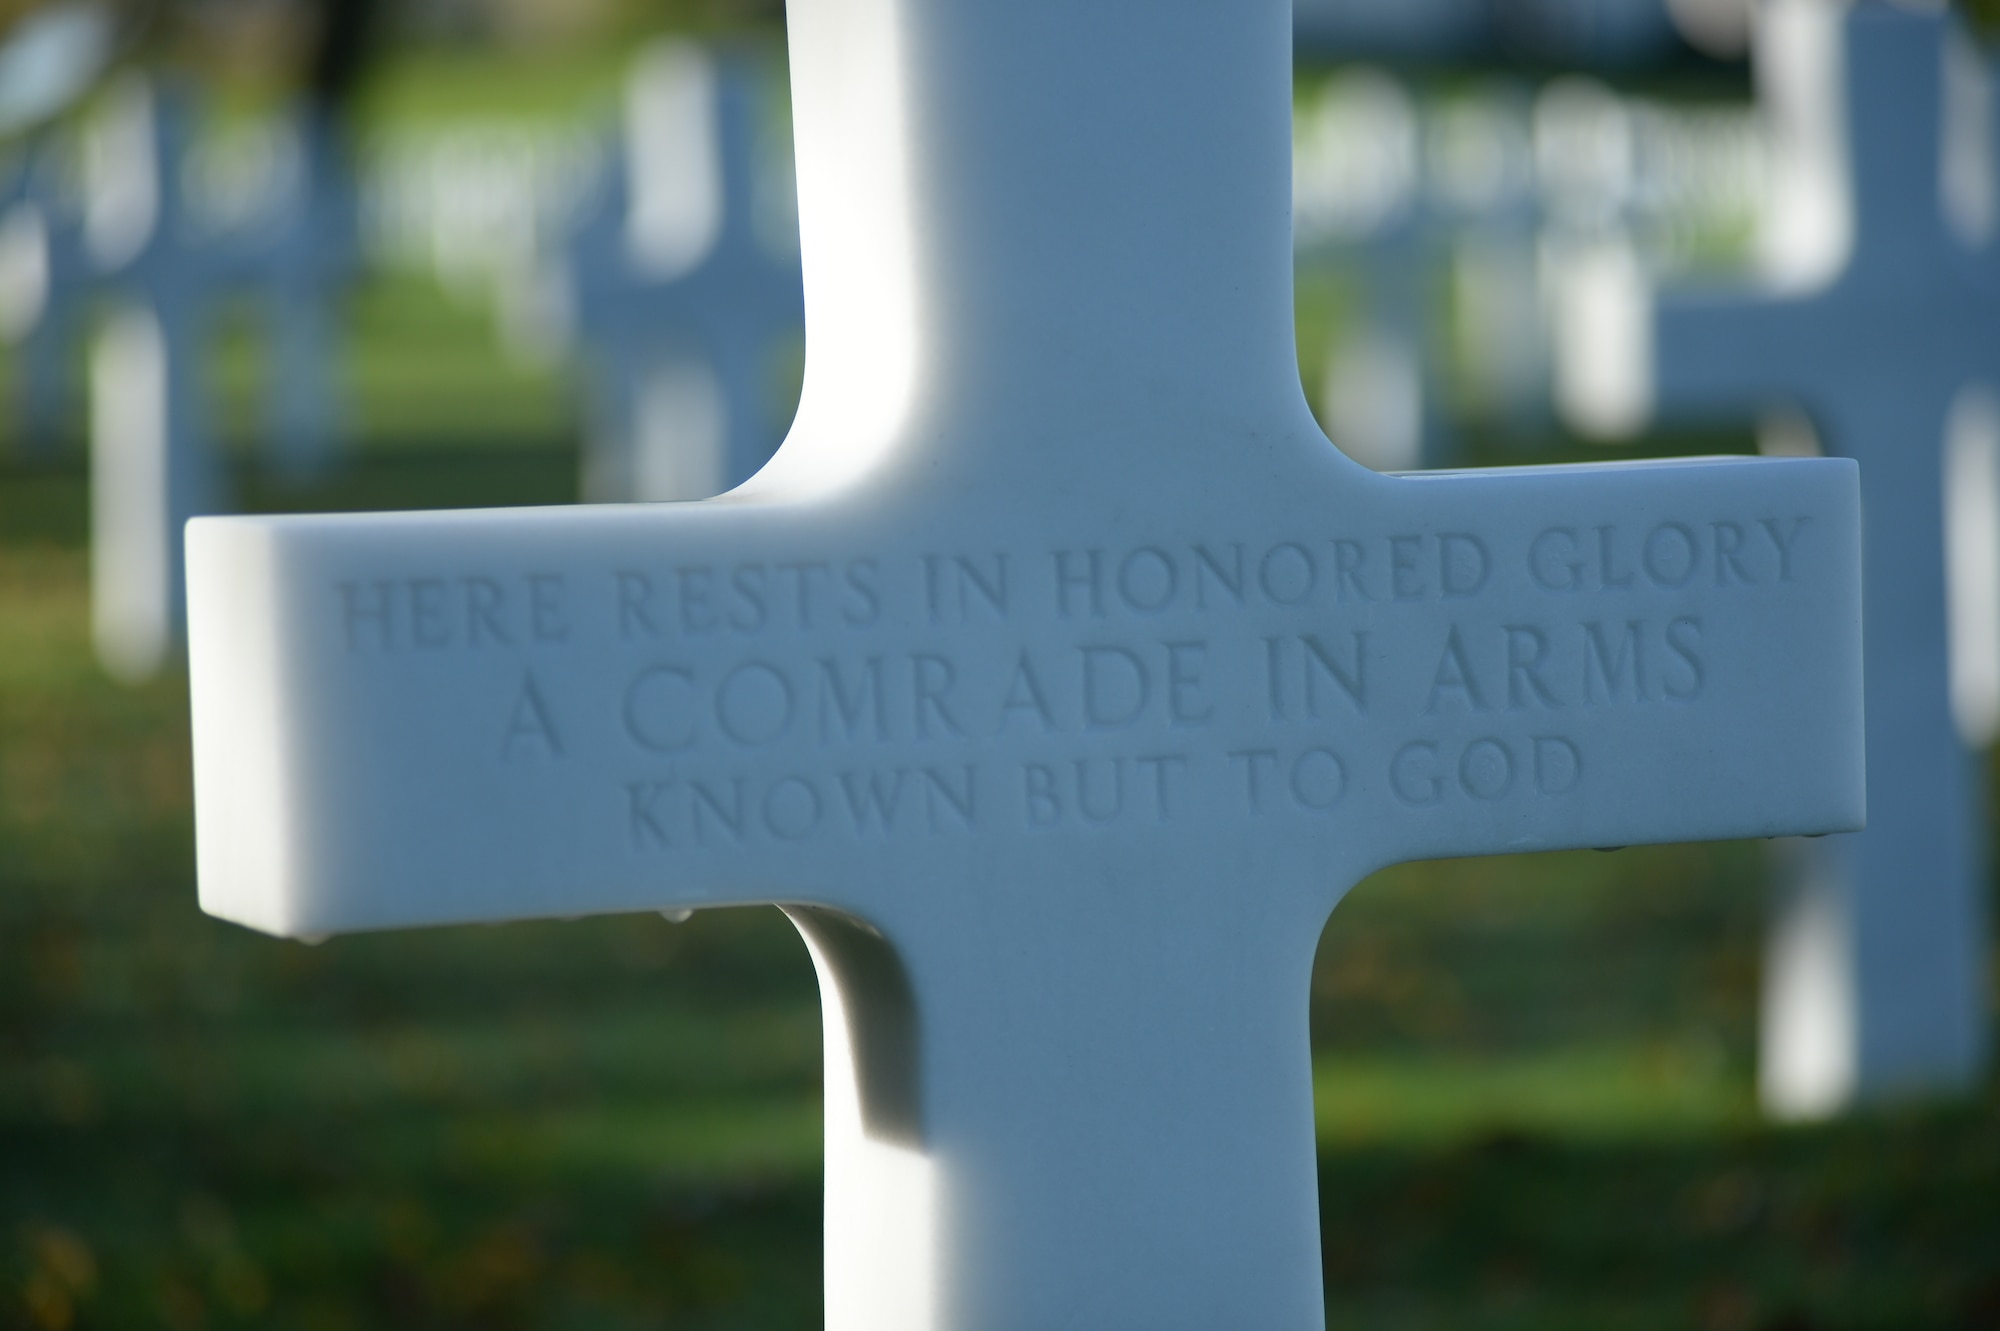 HOMBOURG, Belgium --- A marble cross for an unidentified American service member is displayed at the Henri-Chapelle American Cemetery Nov. 11, 2013.  The cemetery reveres the legacy of 7,992 American service members who died in World War II.  (U.S. Air Force photo by Staff Sgt. Joe W. McFadden / Released)